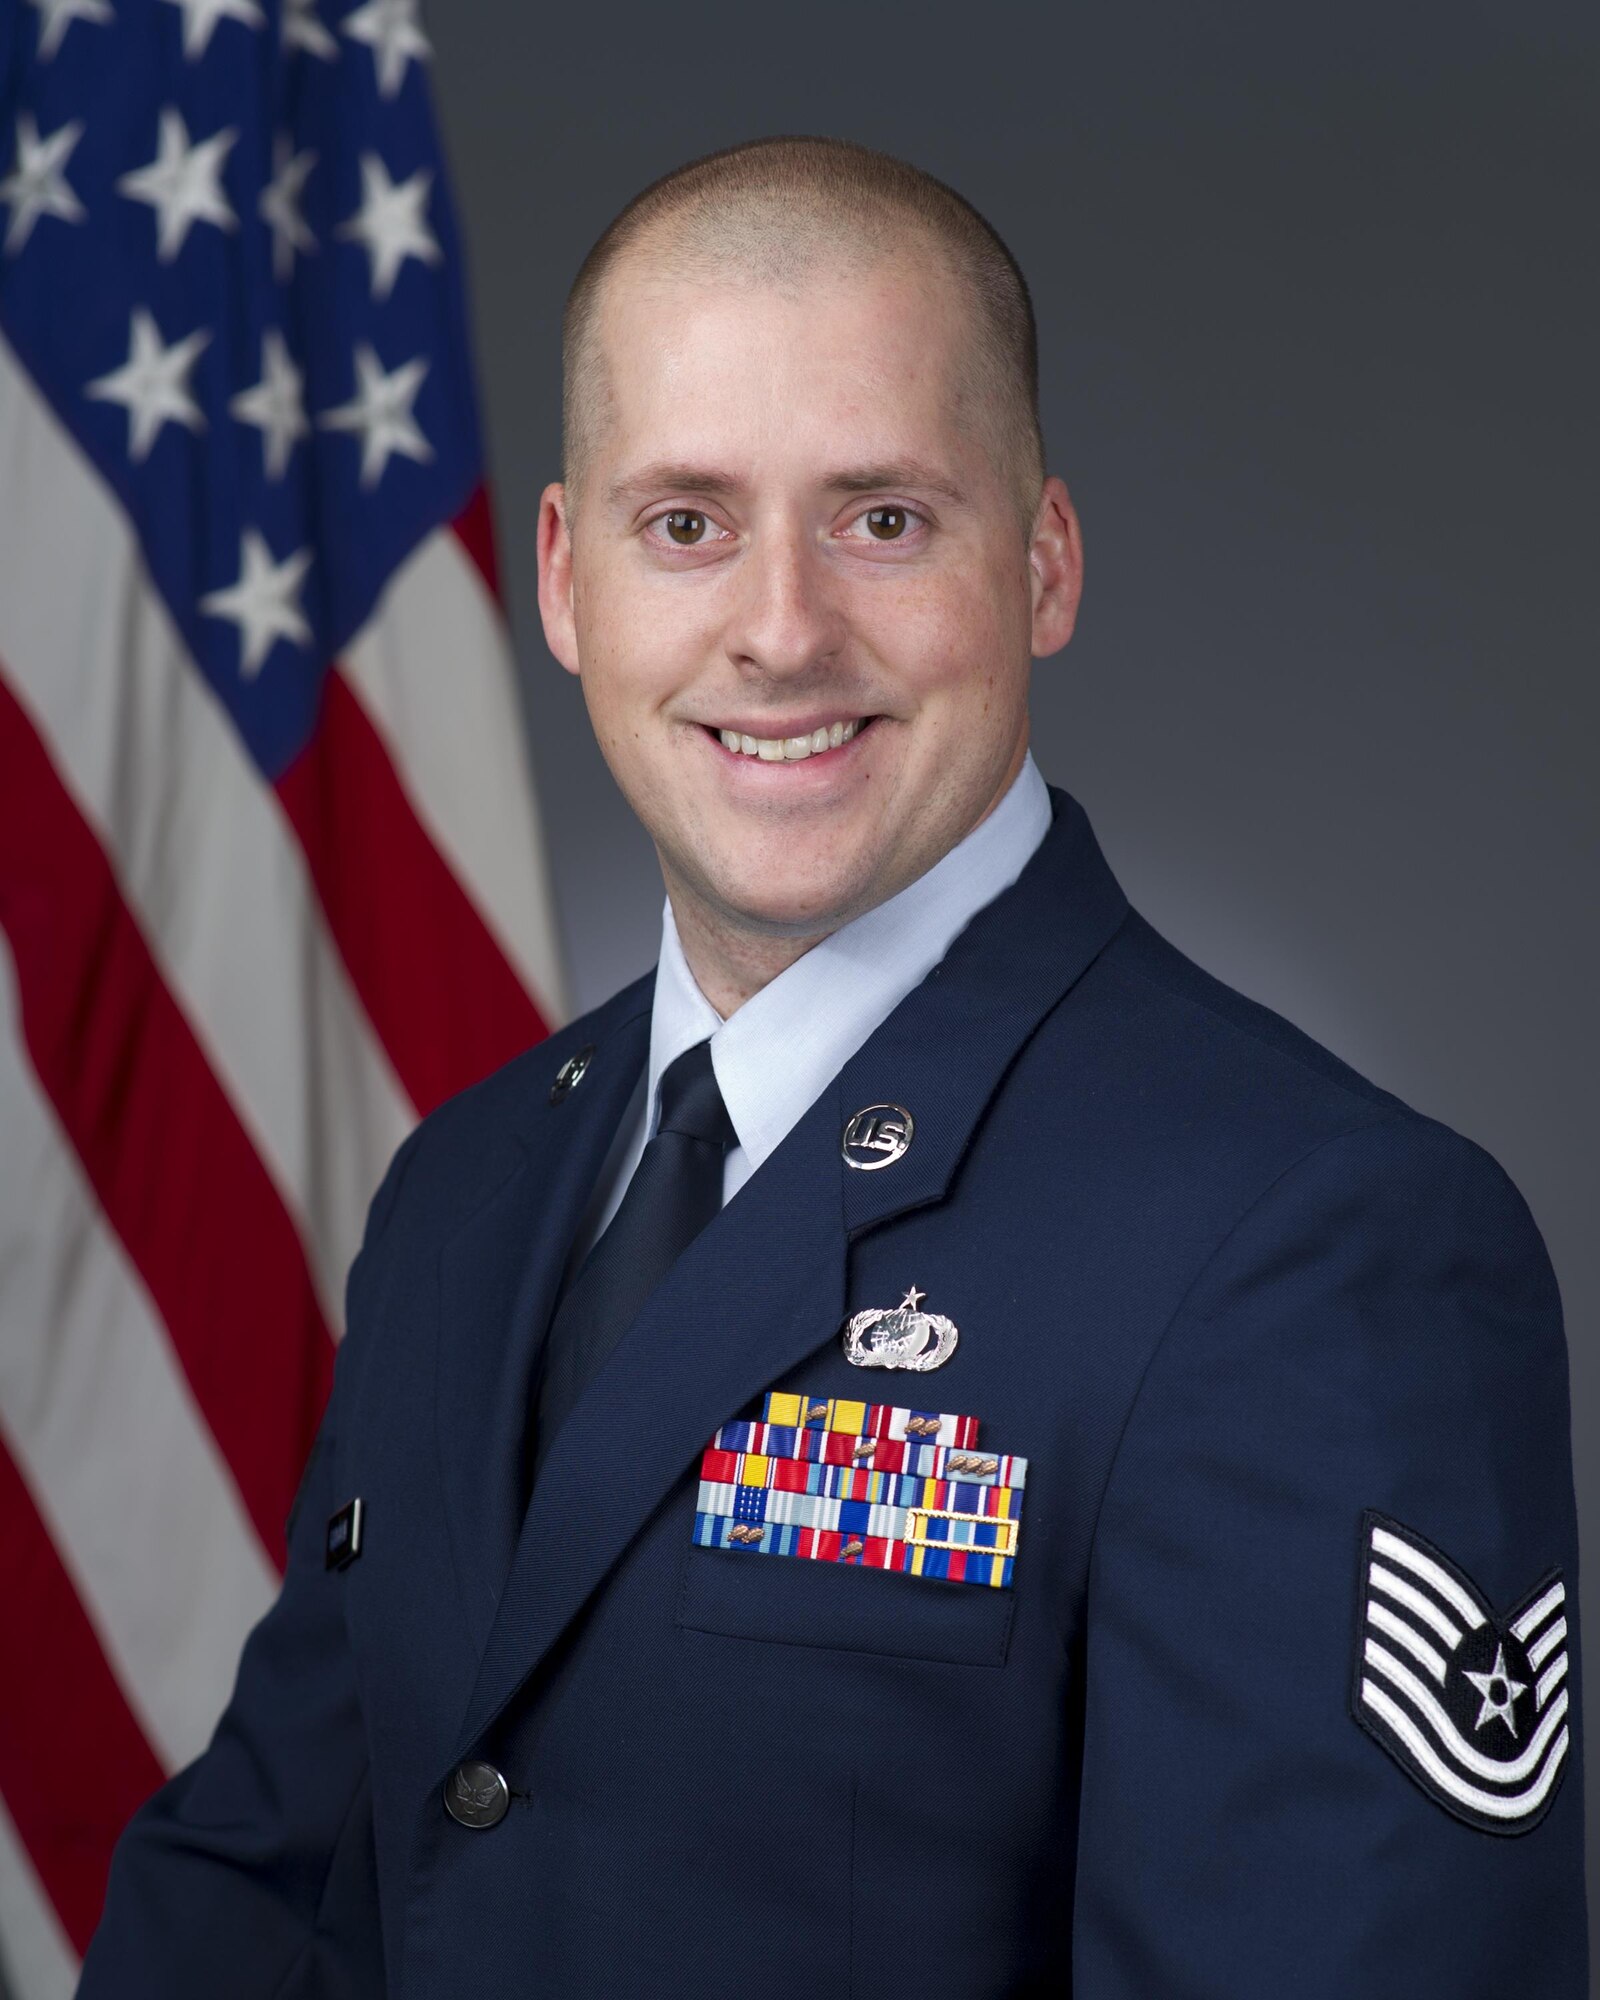 Tech. Sgt. James Hodgman, of the 60th Air Mobility Wing, shares what being a military father means to him and encourages all military parents to cherish every moment with their children. (U.S. Air Force photo)